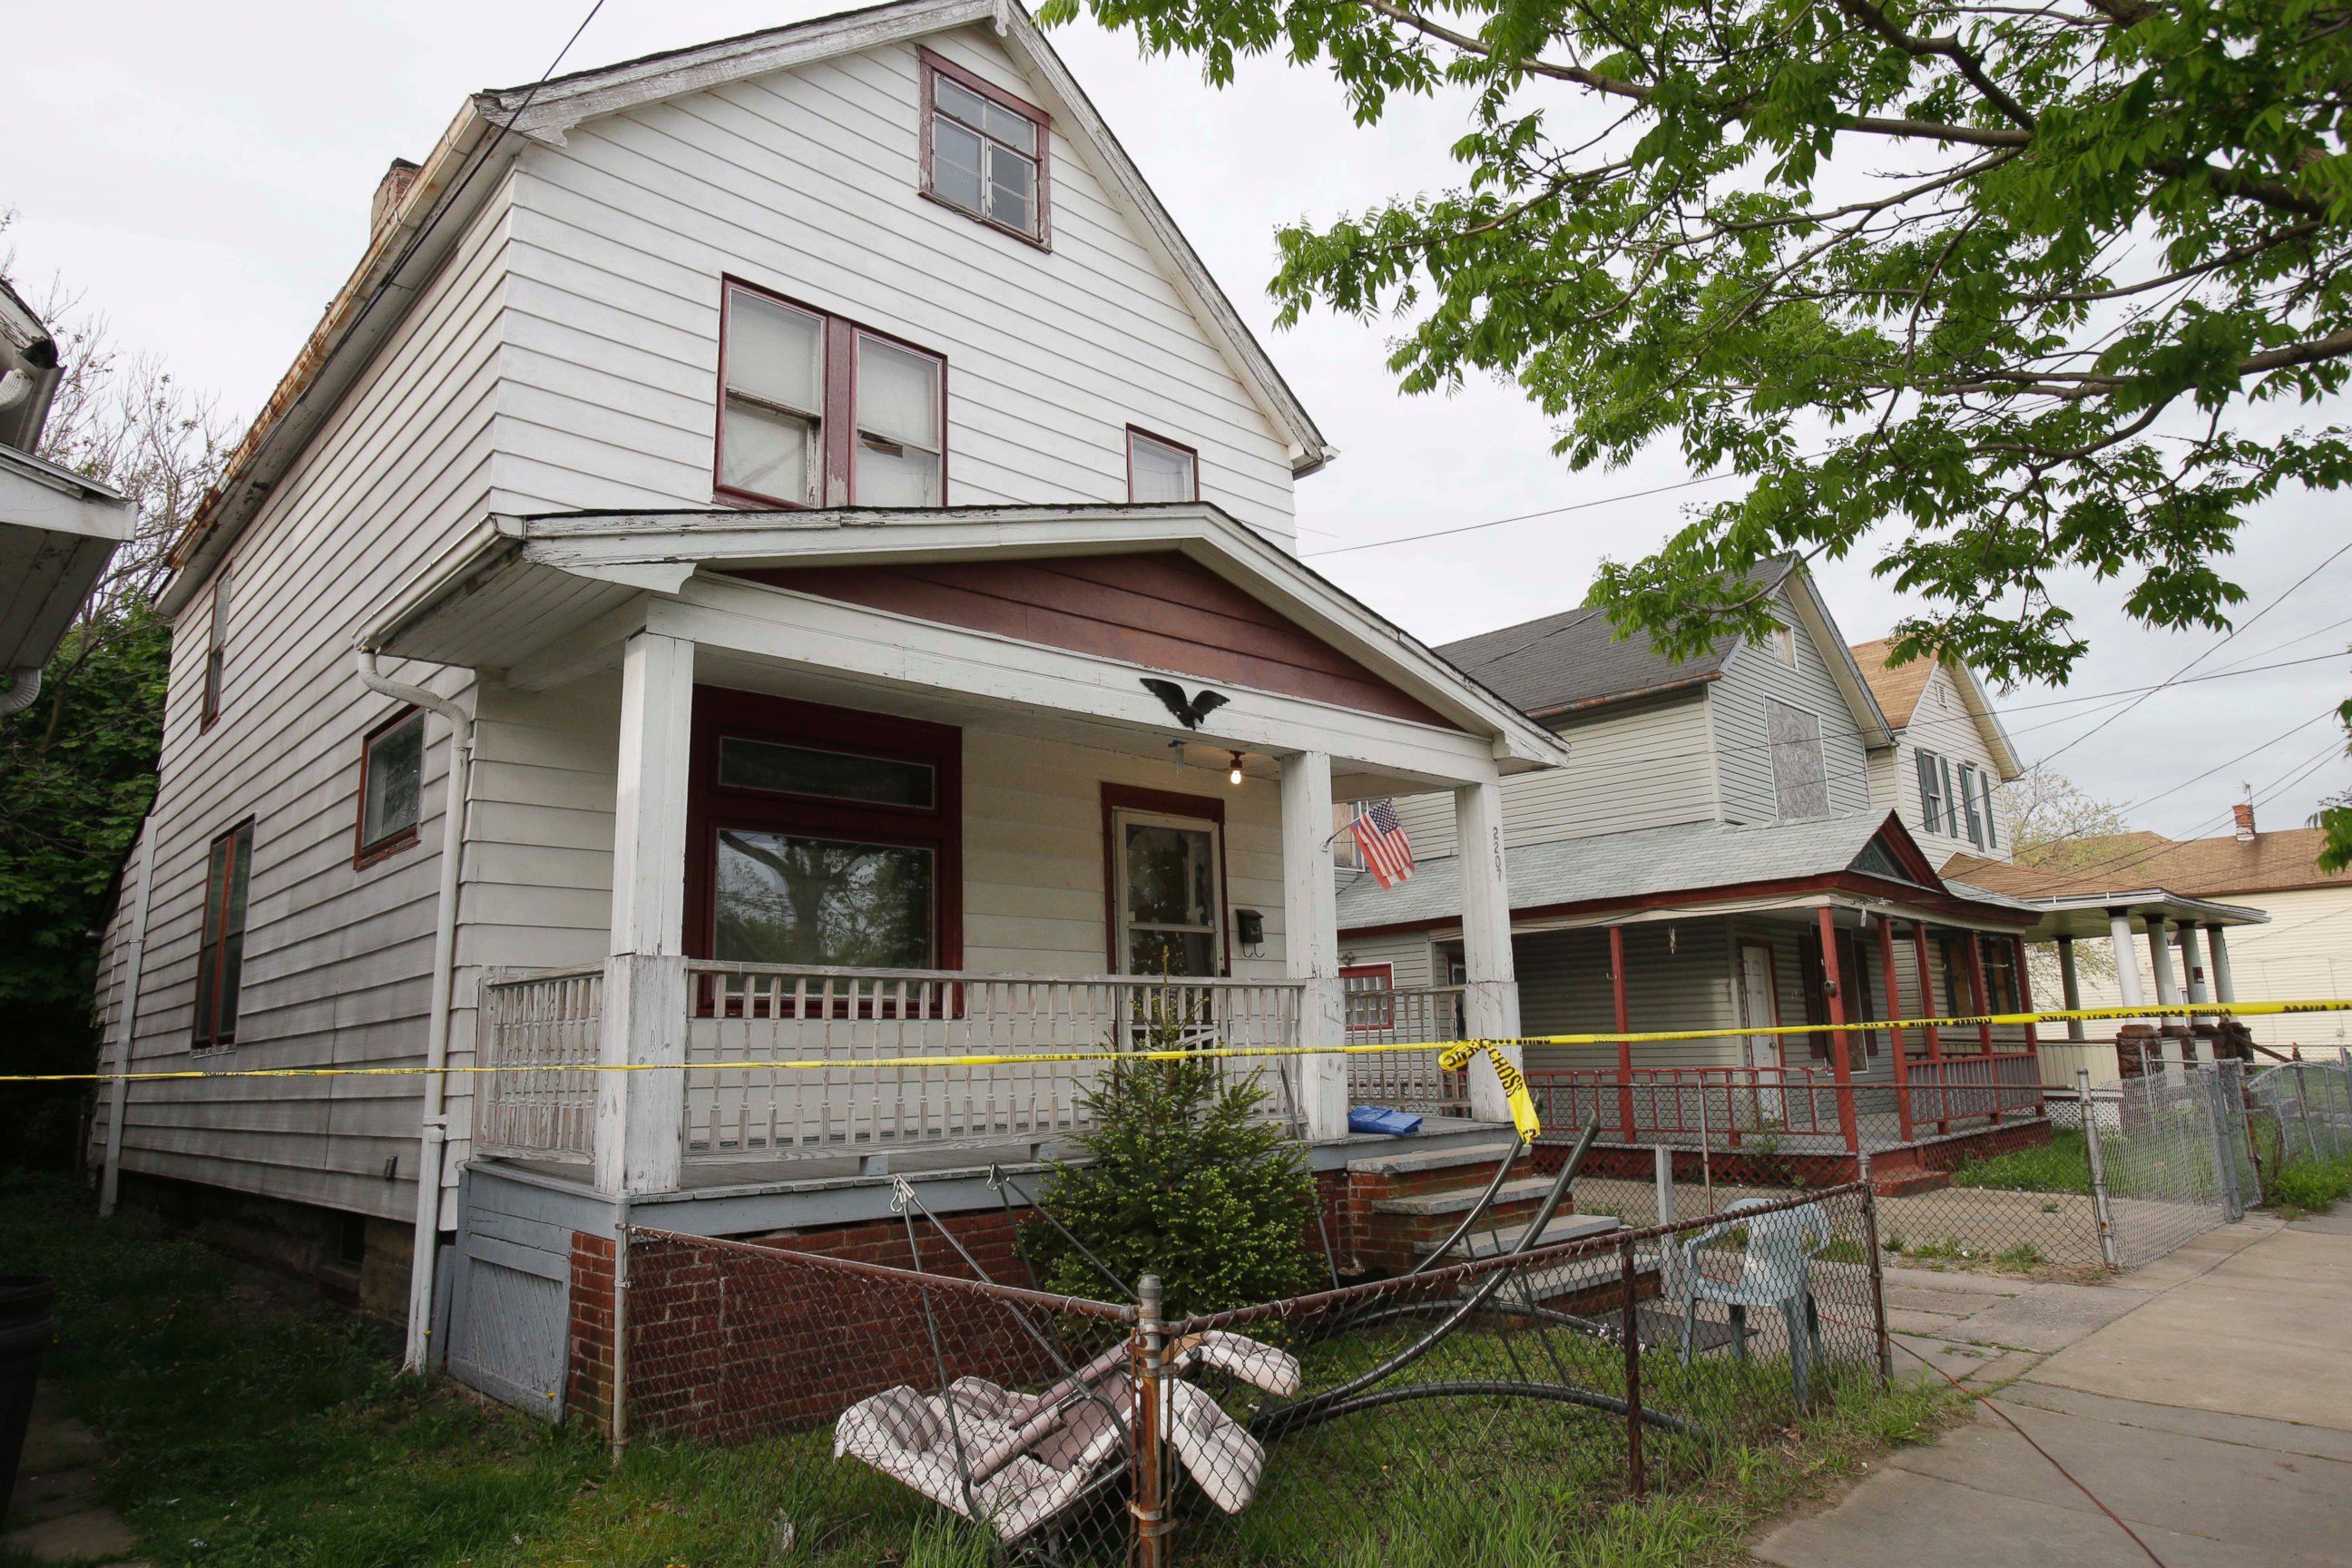 PHOTO: A house where three women escaped is shown, May 7, 2013, in Cleveland.